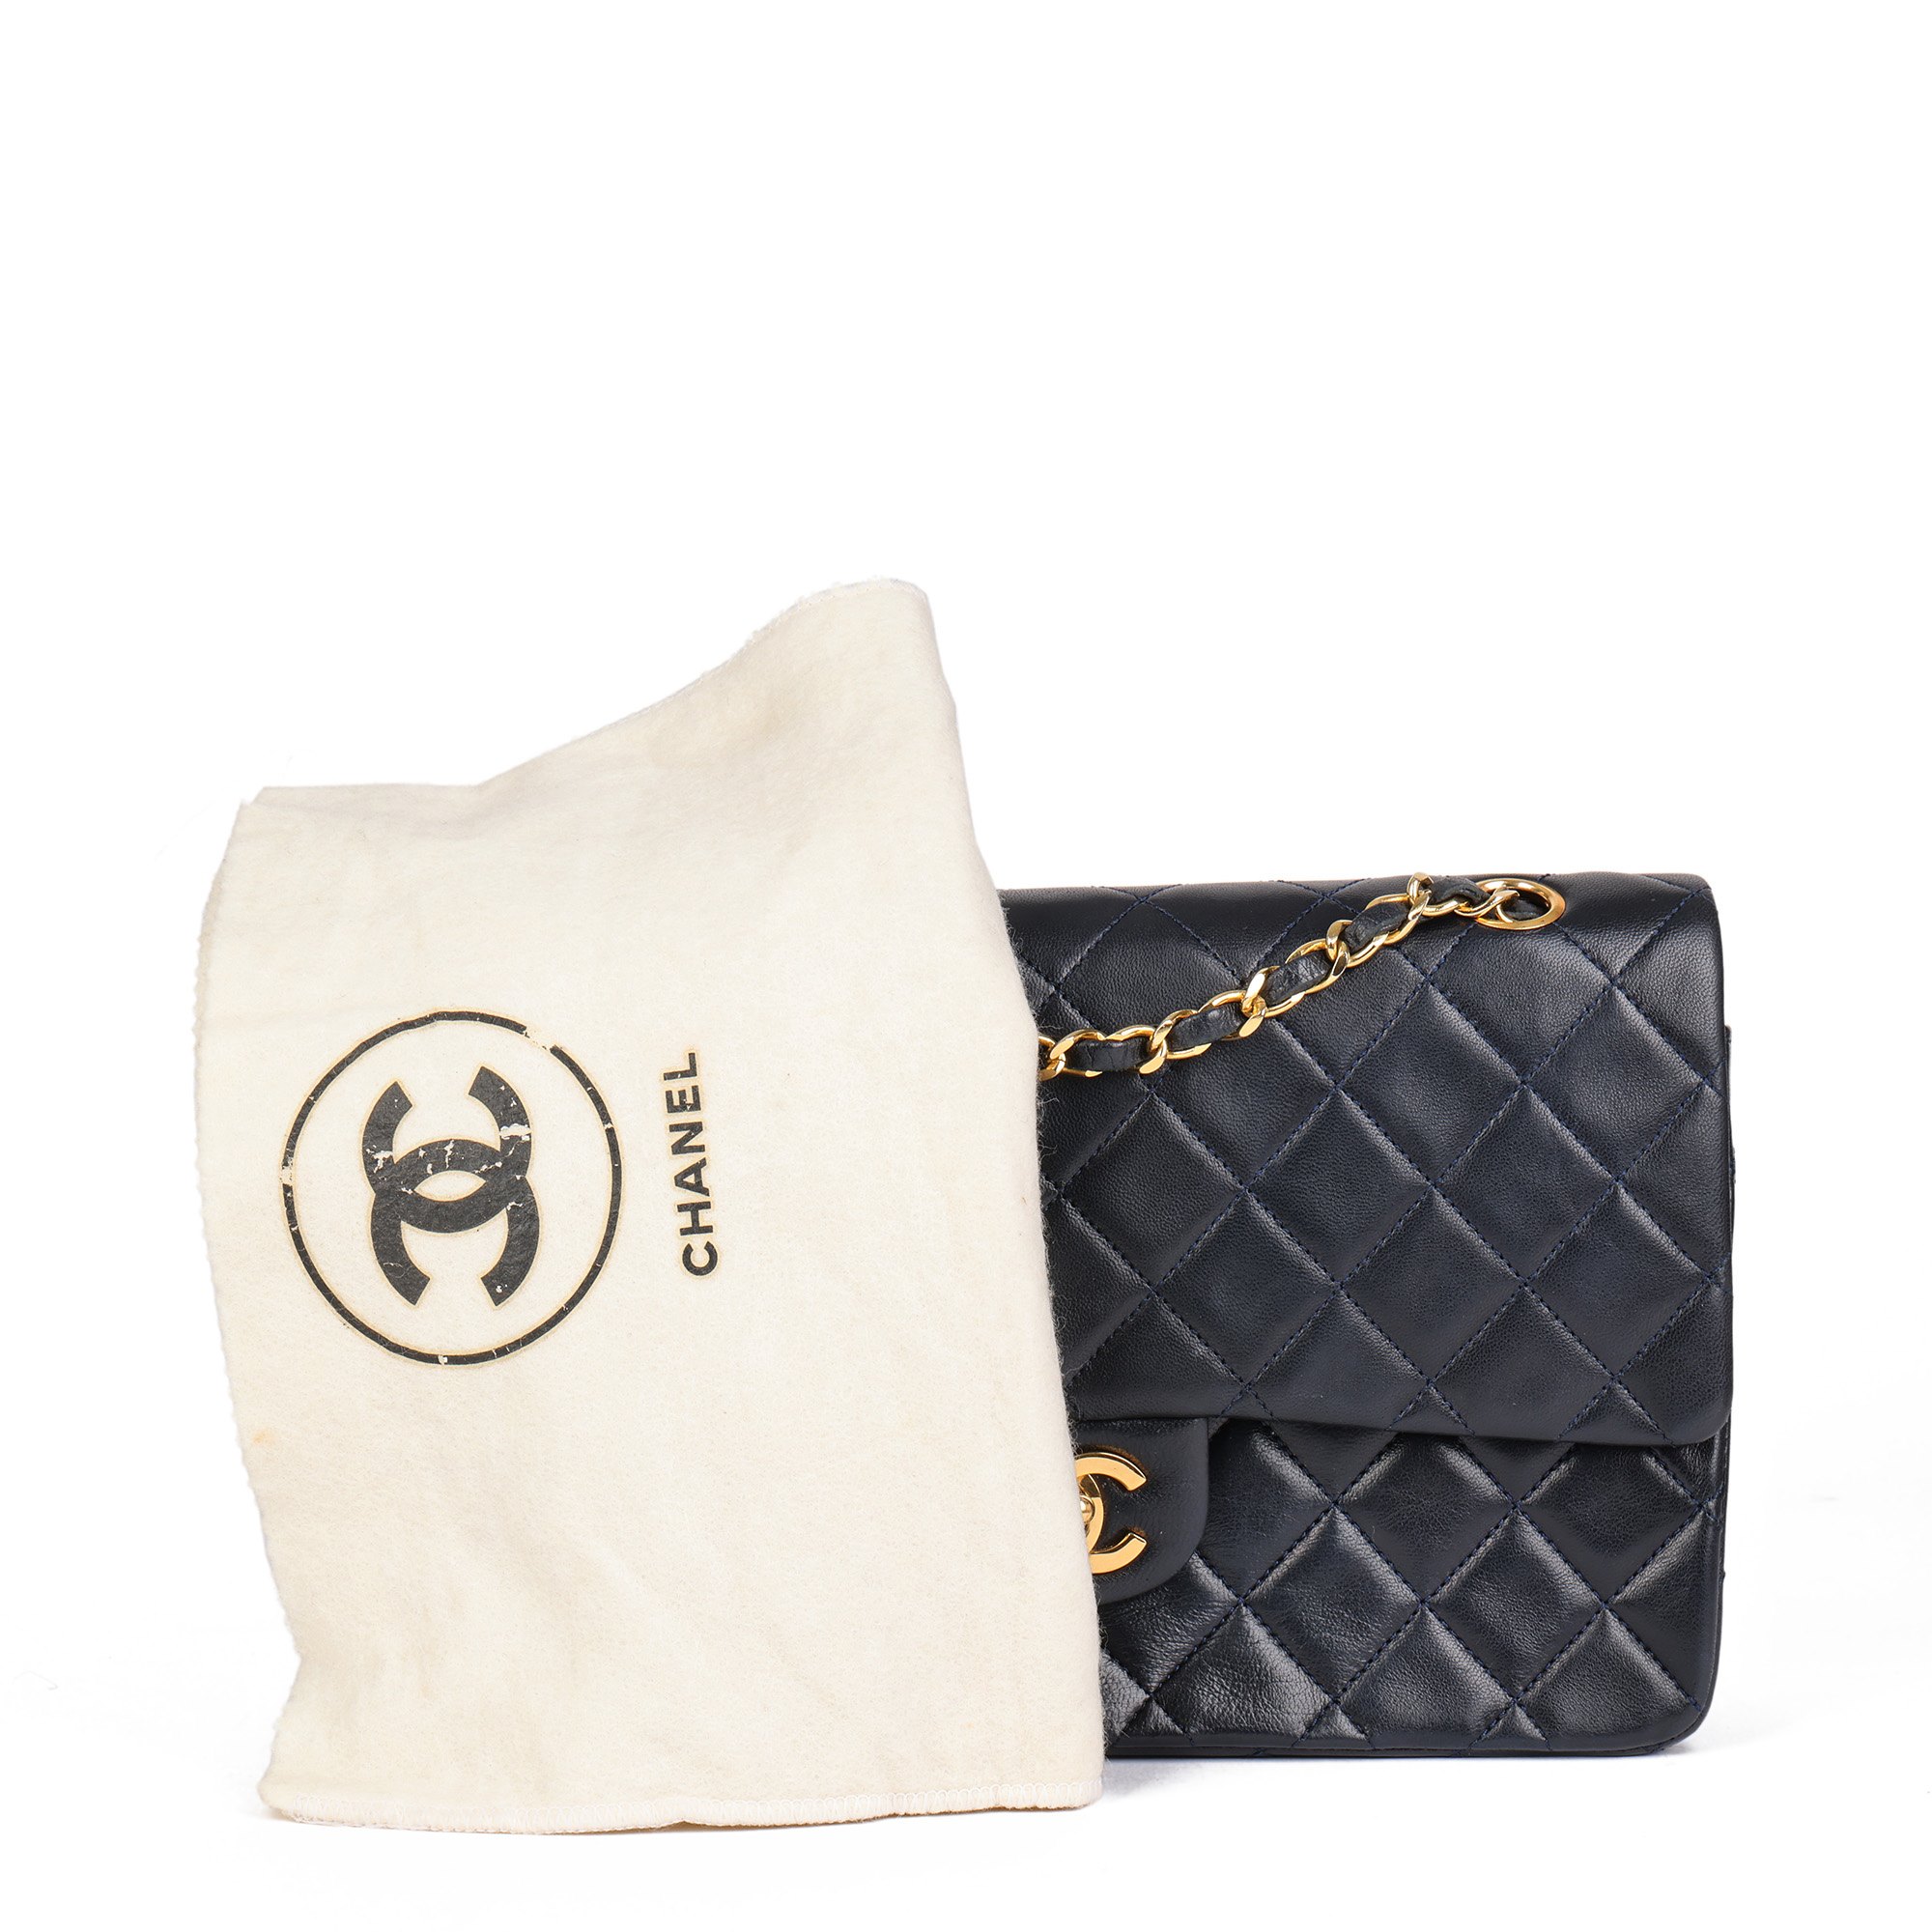 Chanel Navy Quilted Lambskin Vintage Medium Classic Double Flap Bag